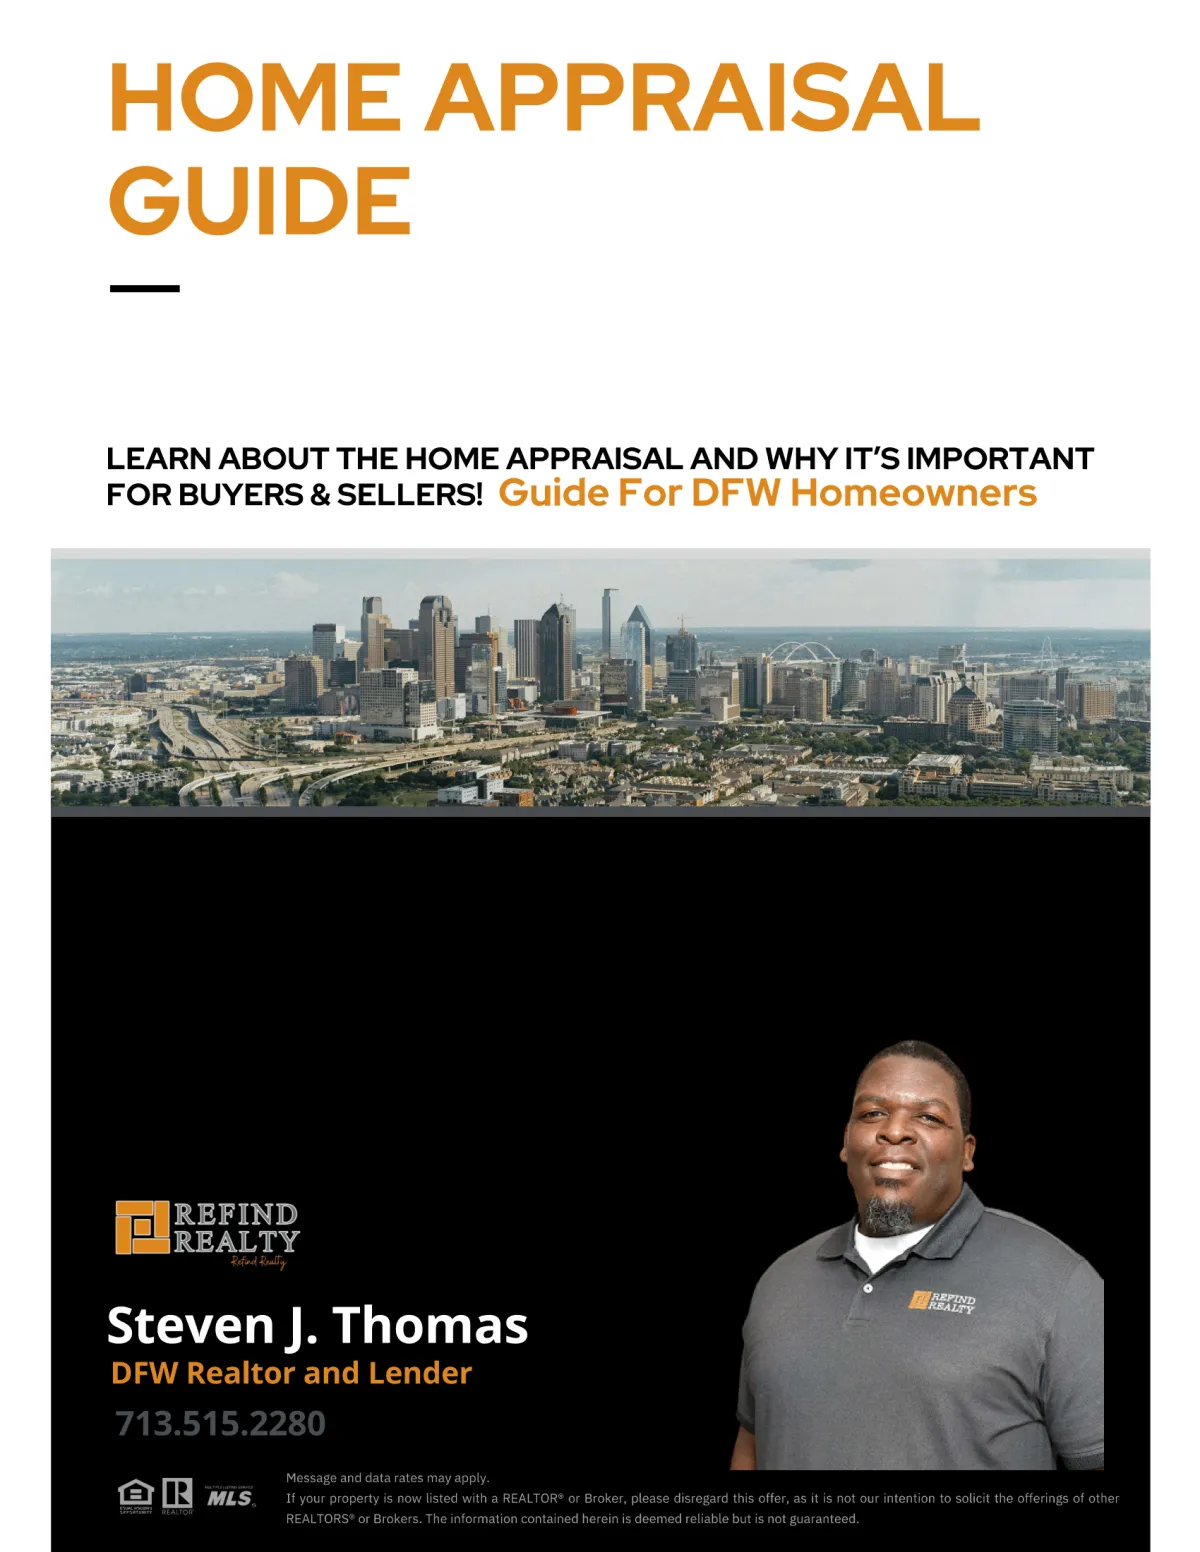 Home Appraisals Guide